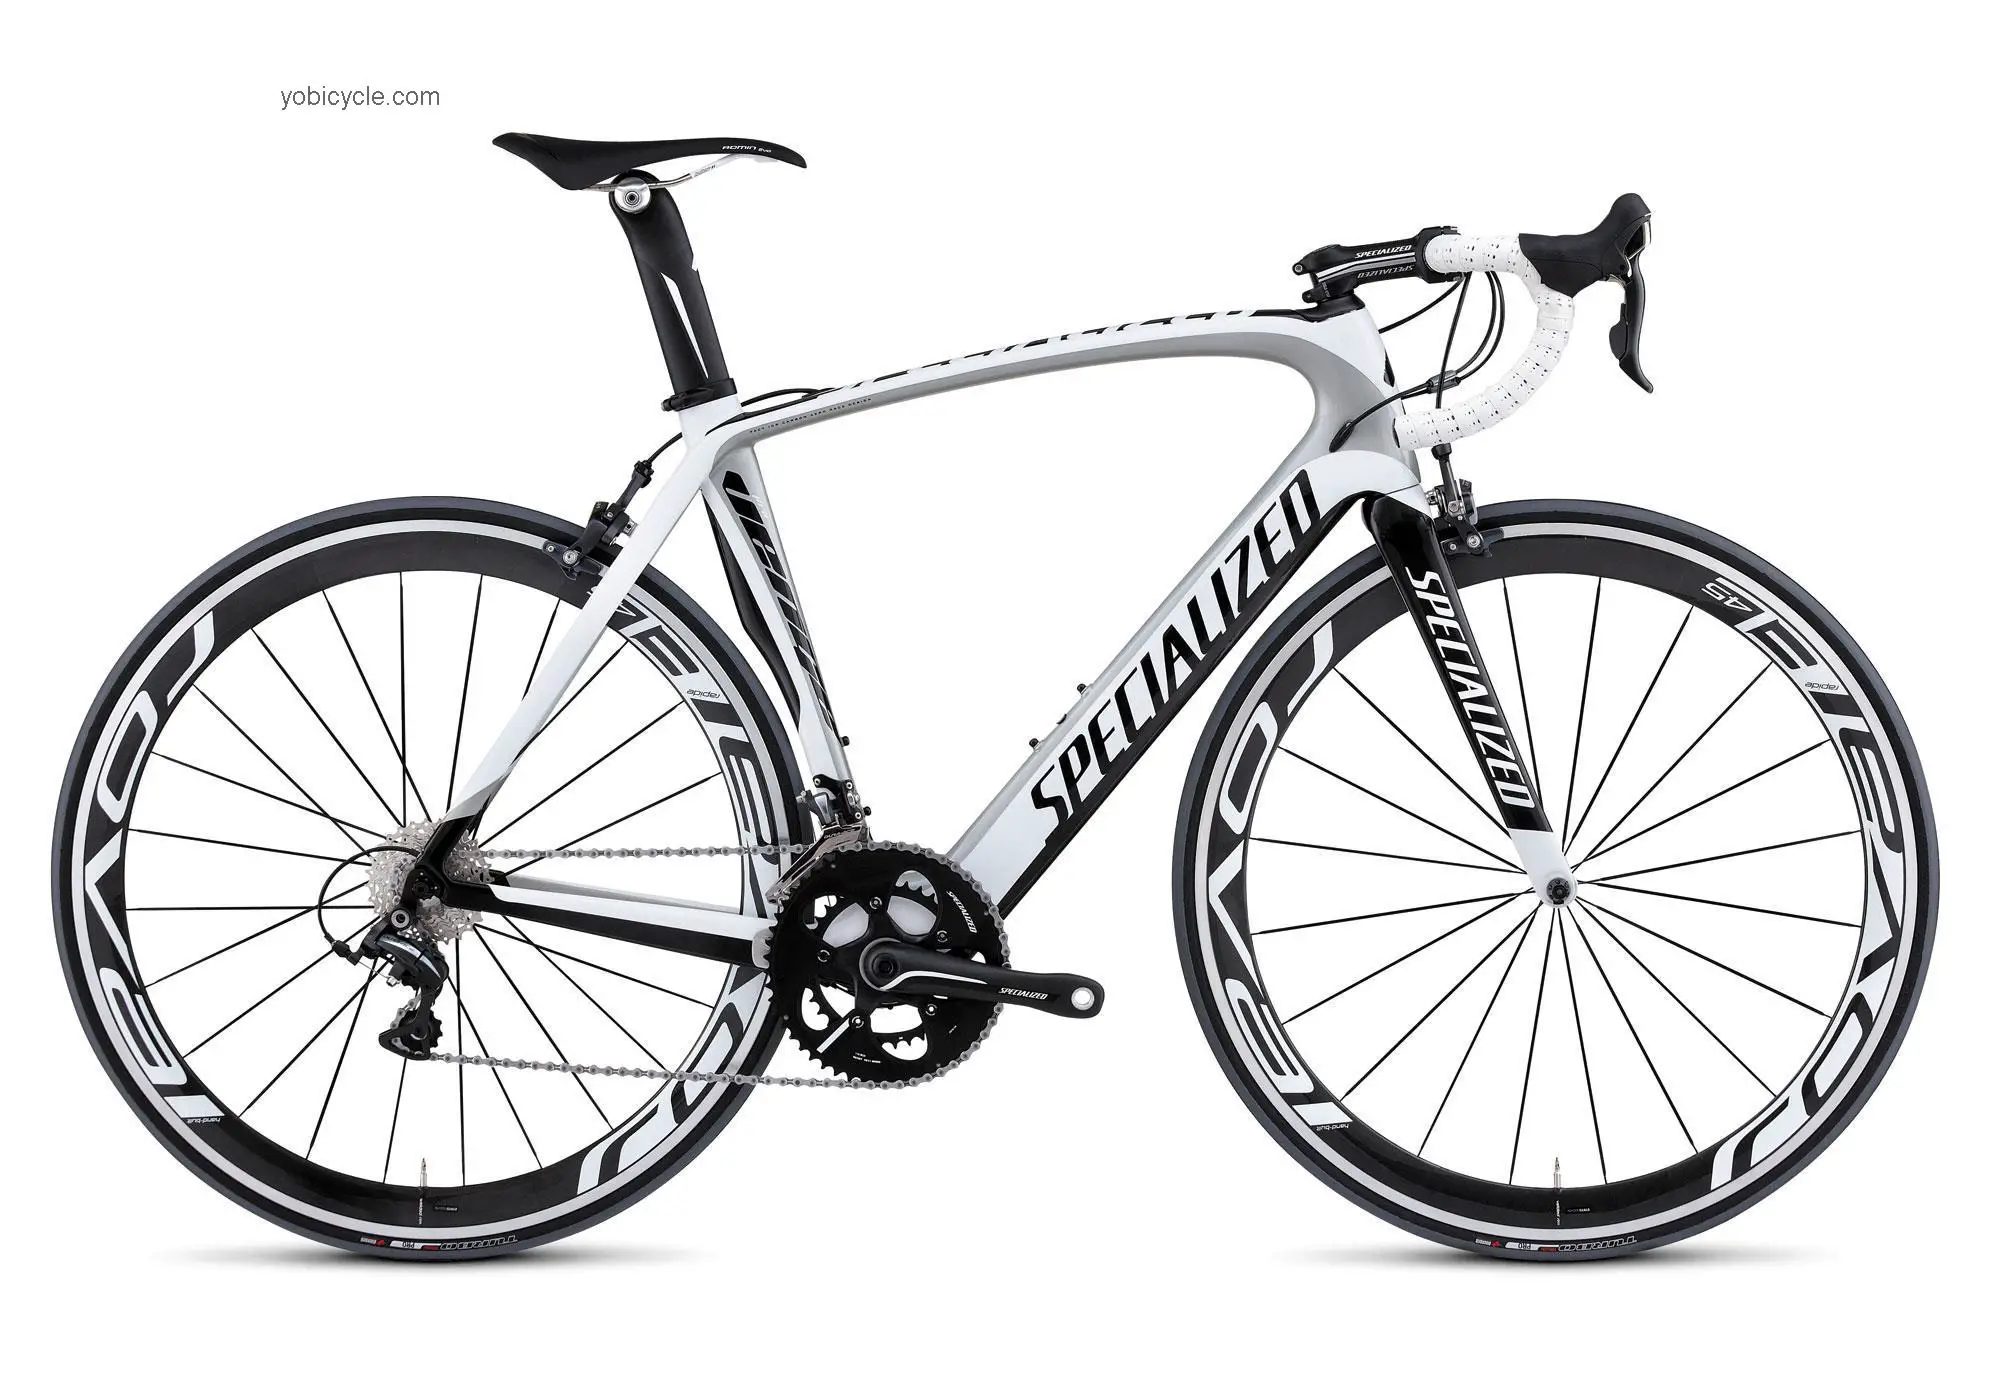 Specialized  Venge Pro M2 Dura-Ace Technical data and specifications